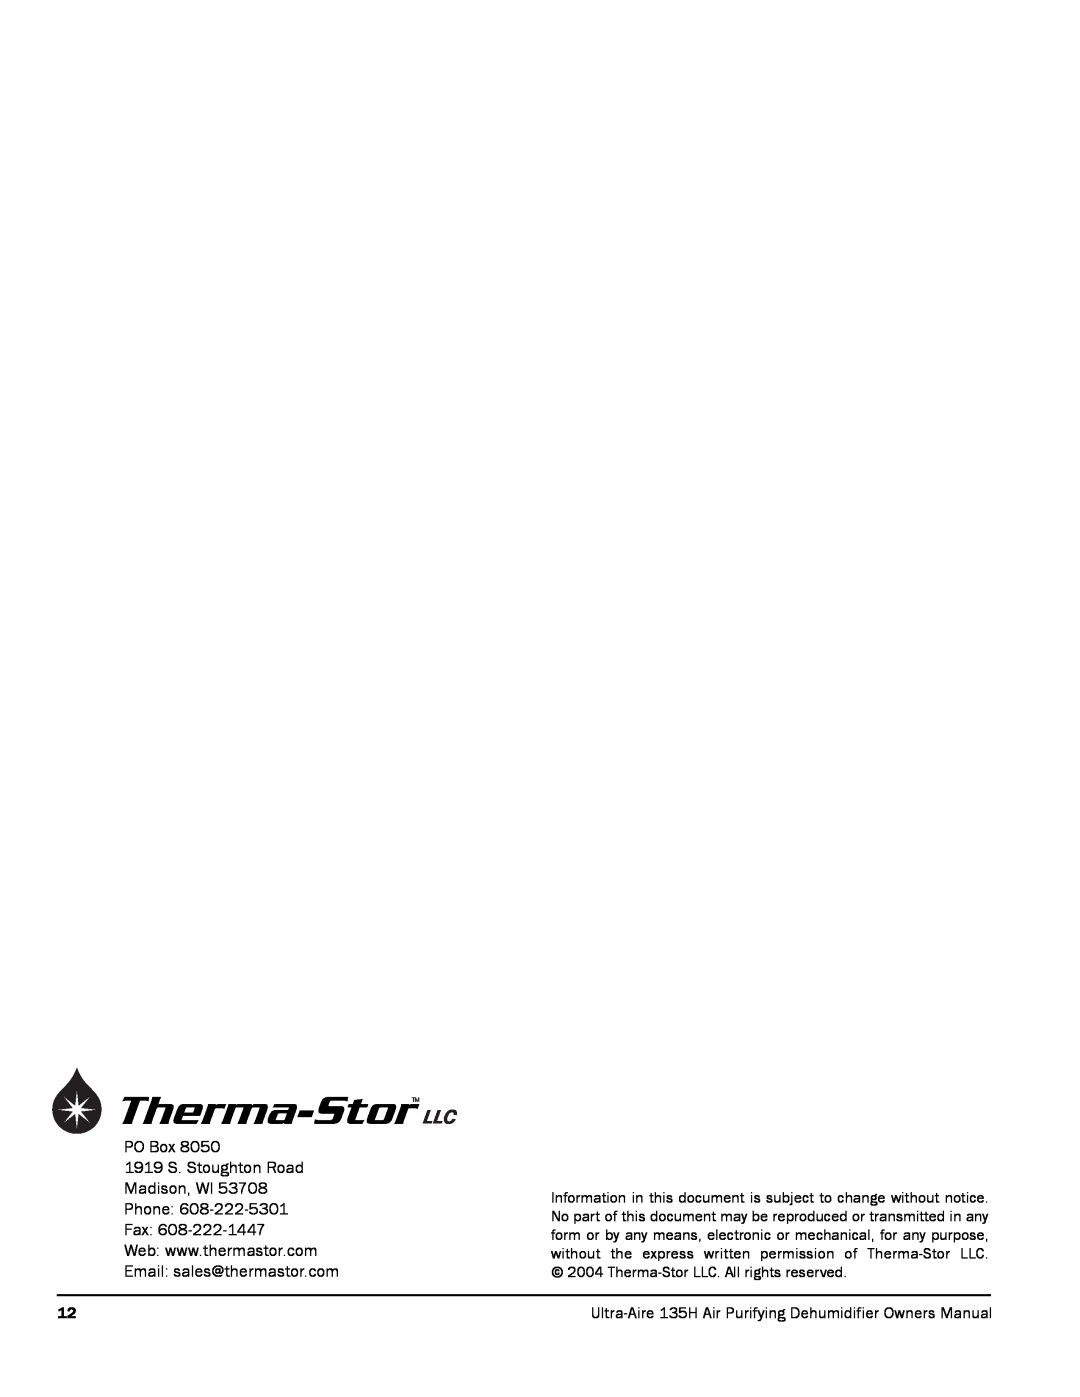 Therma-Stor Products Group 135H owner manual PO Box 